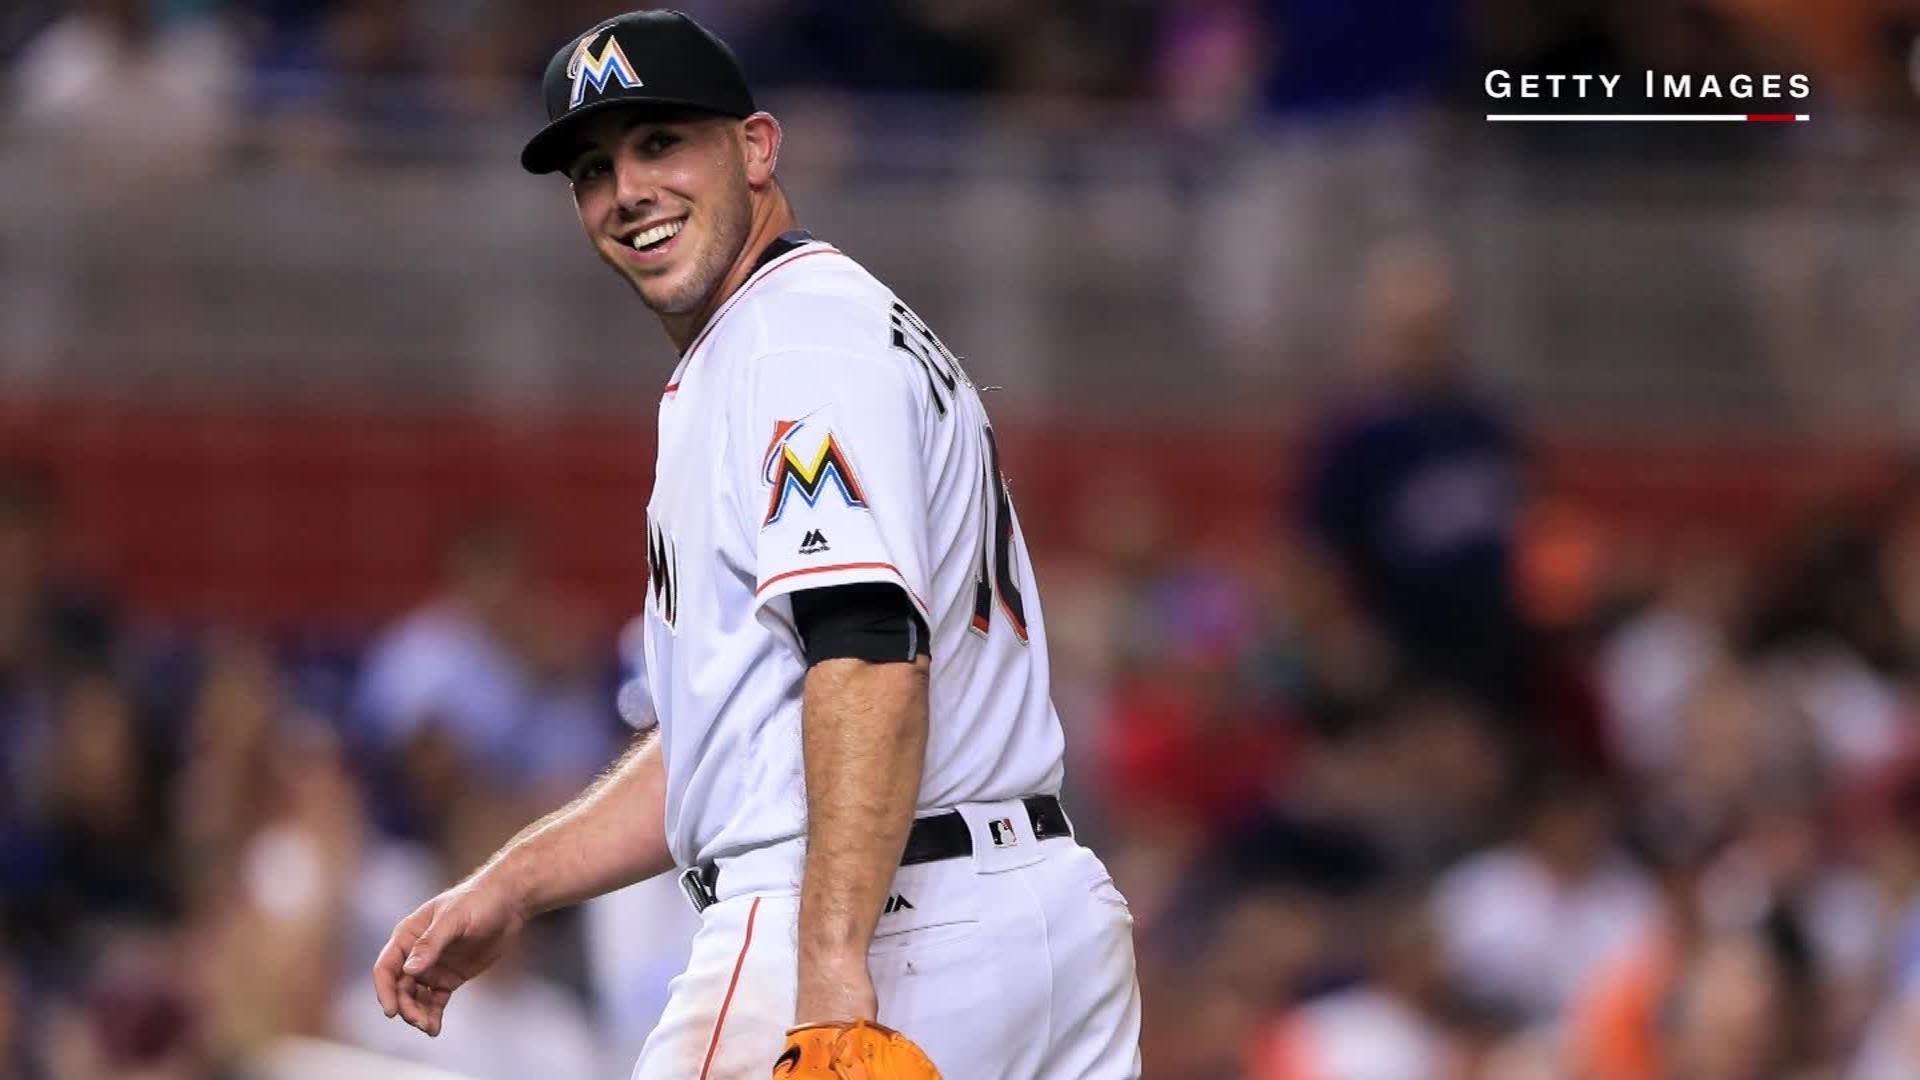 Marlins star Jose Fernandez was drunk, had cocaine in his system